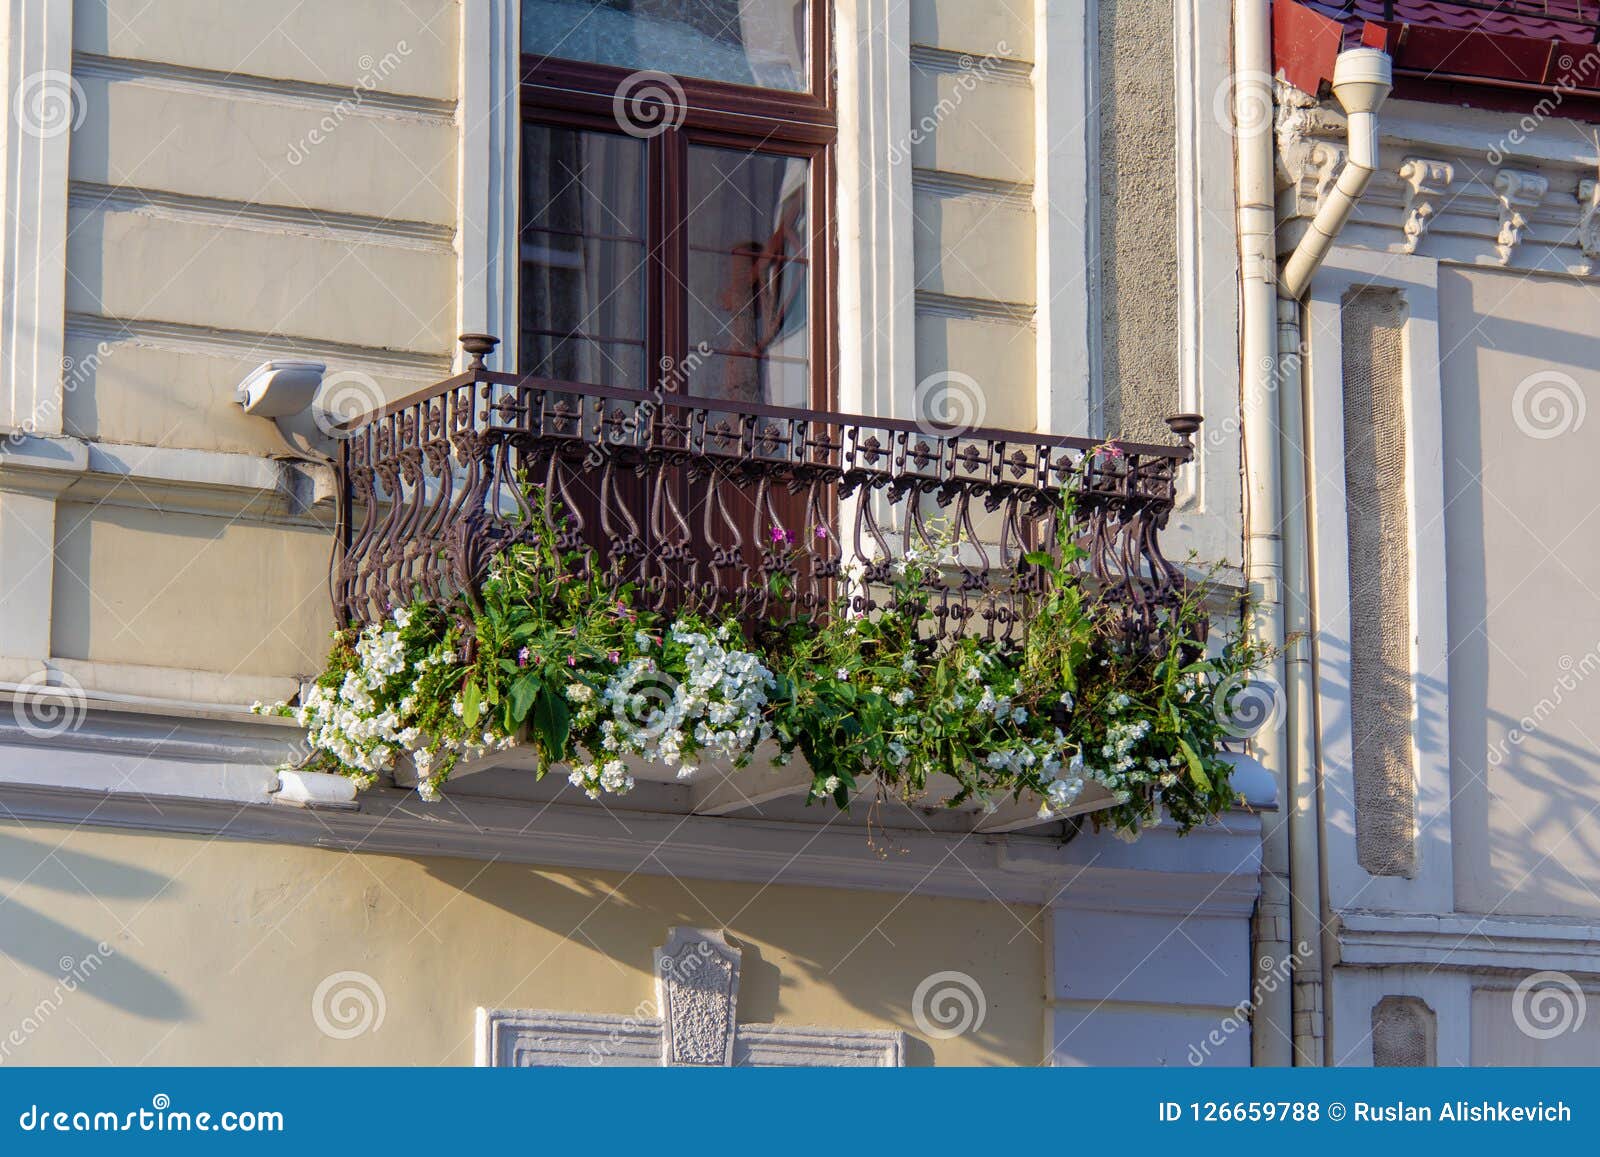 Balcony With Flowers And Shaped Wrought-Iron Railing Stock Photo - Image Of  Green, Balcony: 126659788